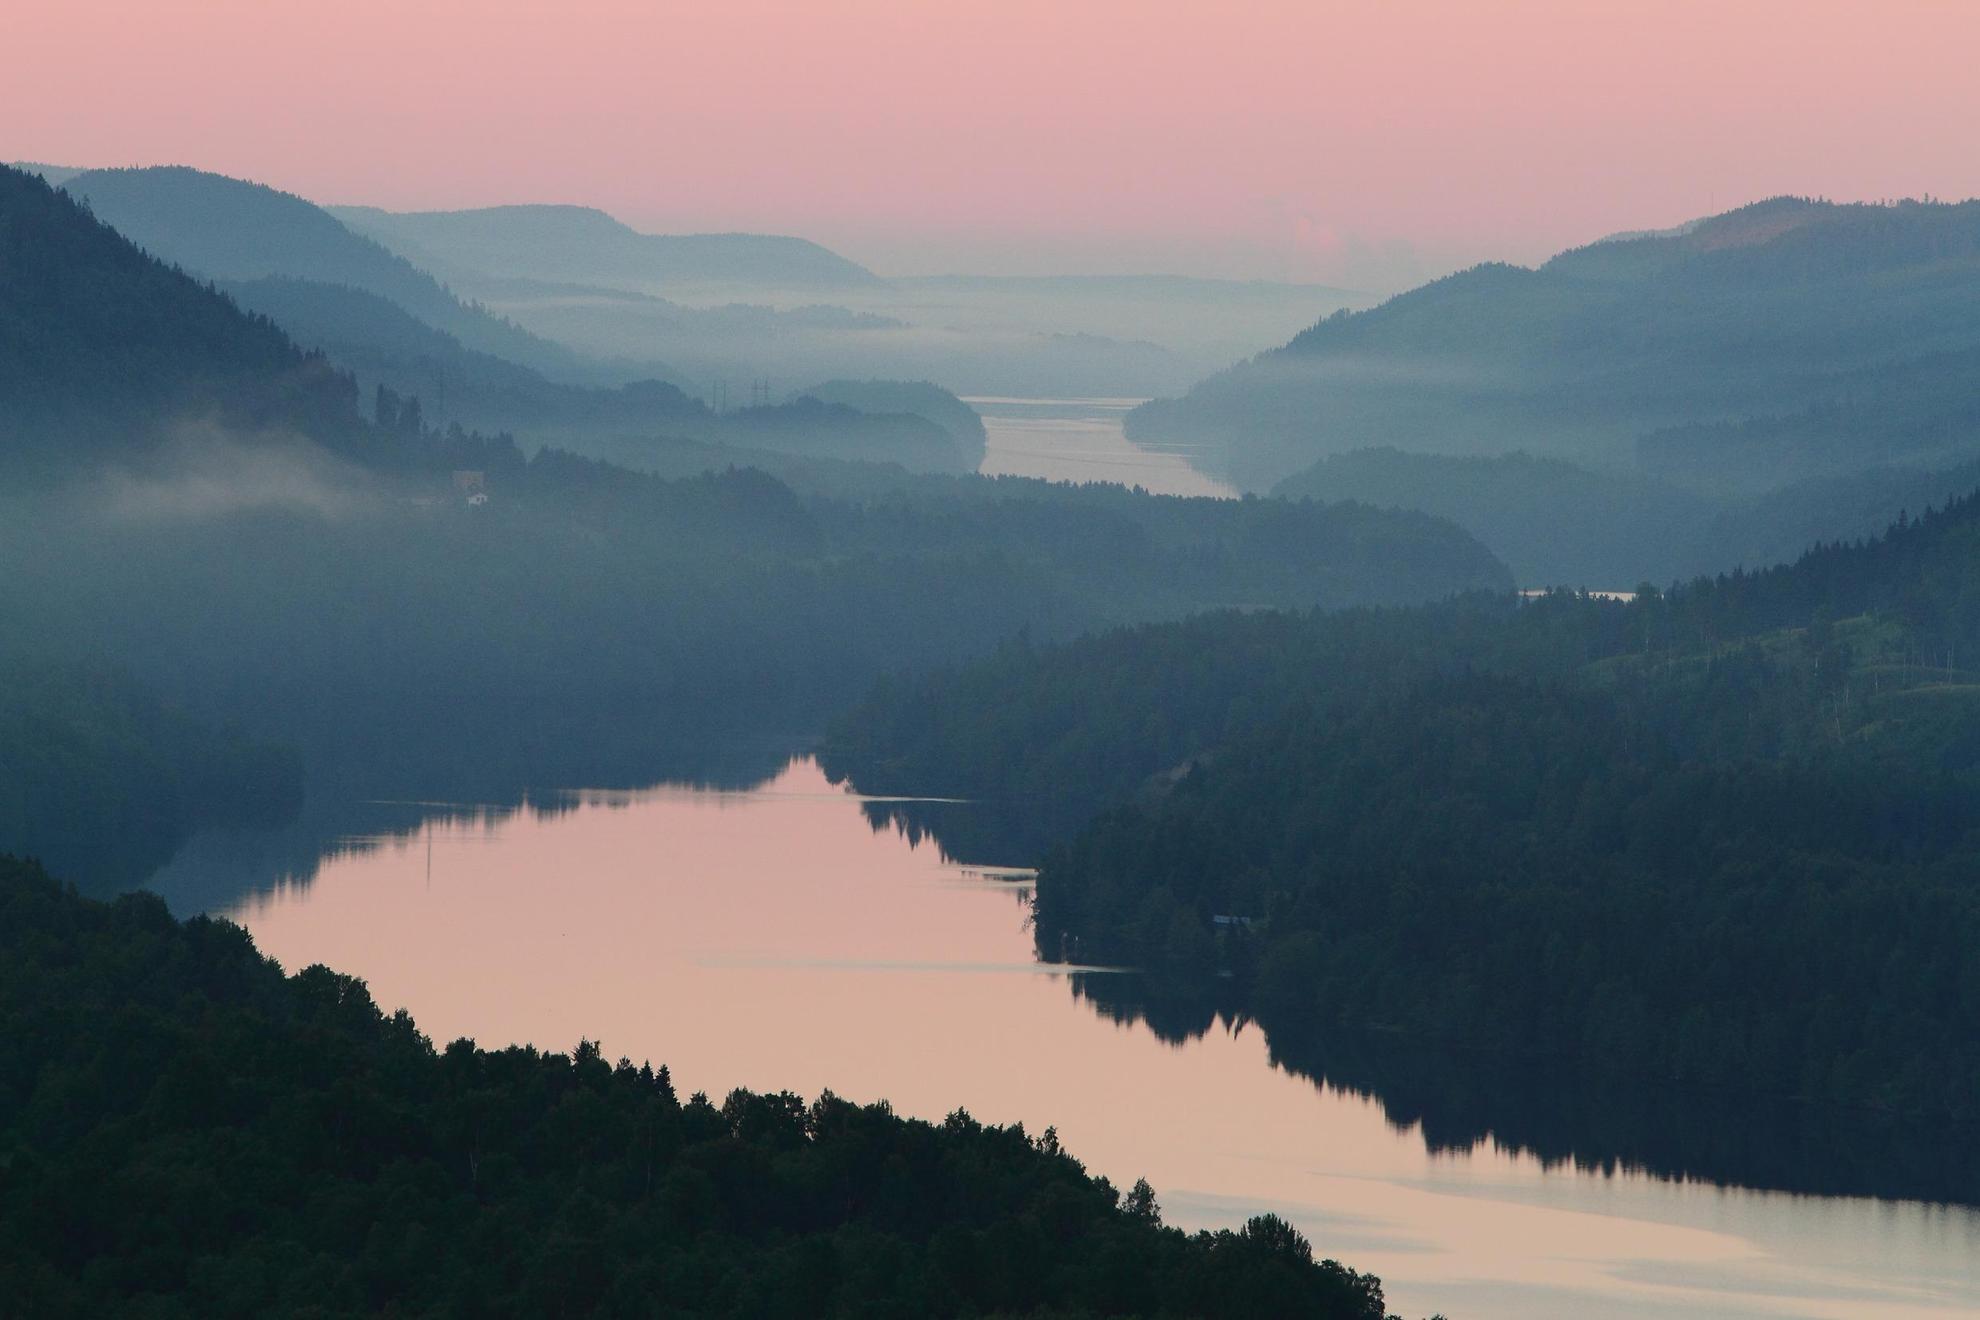 View of the Indalsälven at dusk. The fog is low and the sky is dusky pink.